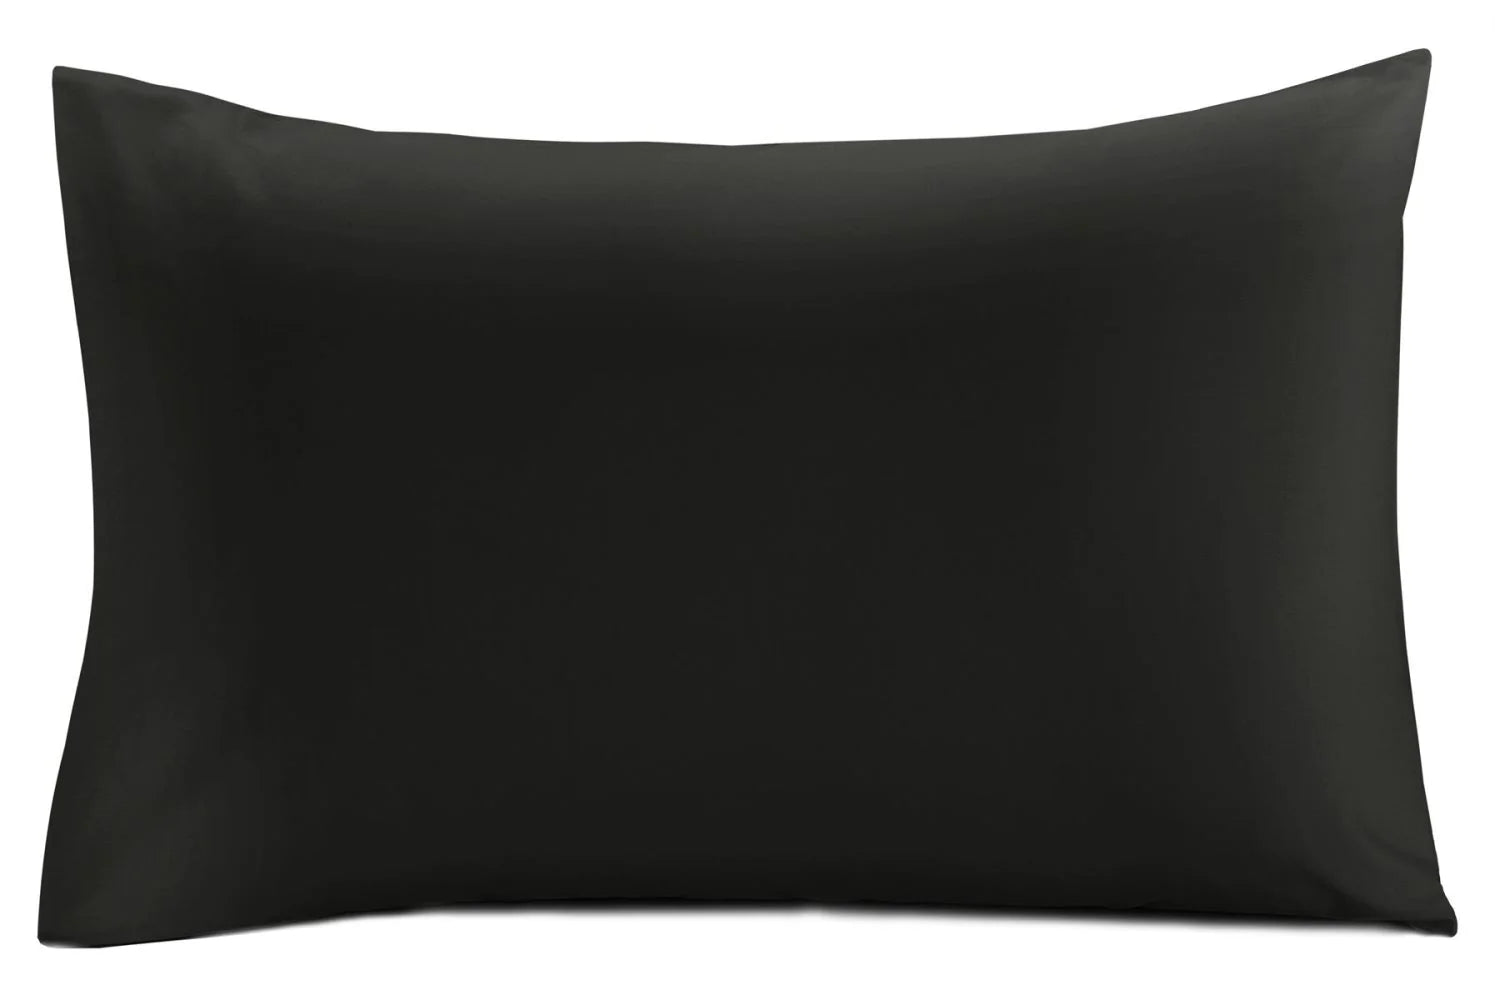 Disposable Pillow Cases fro Tattooing - Black